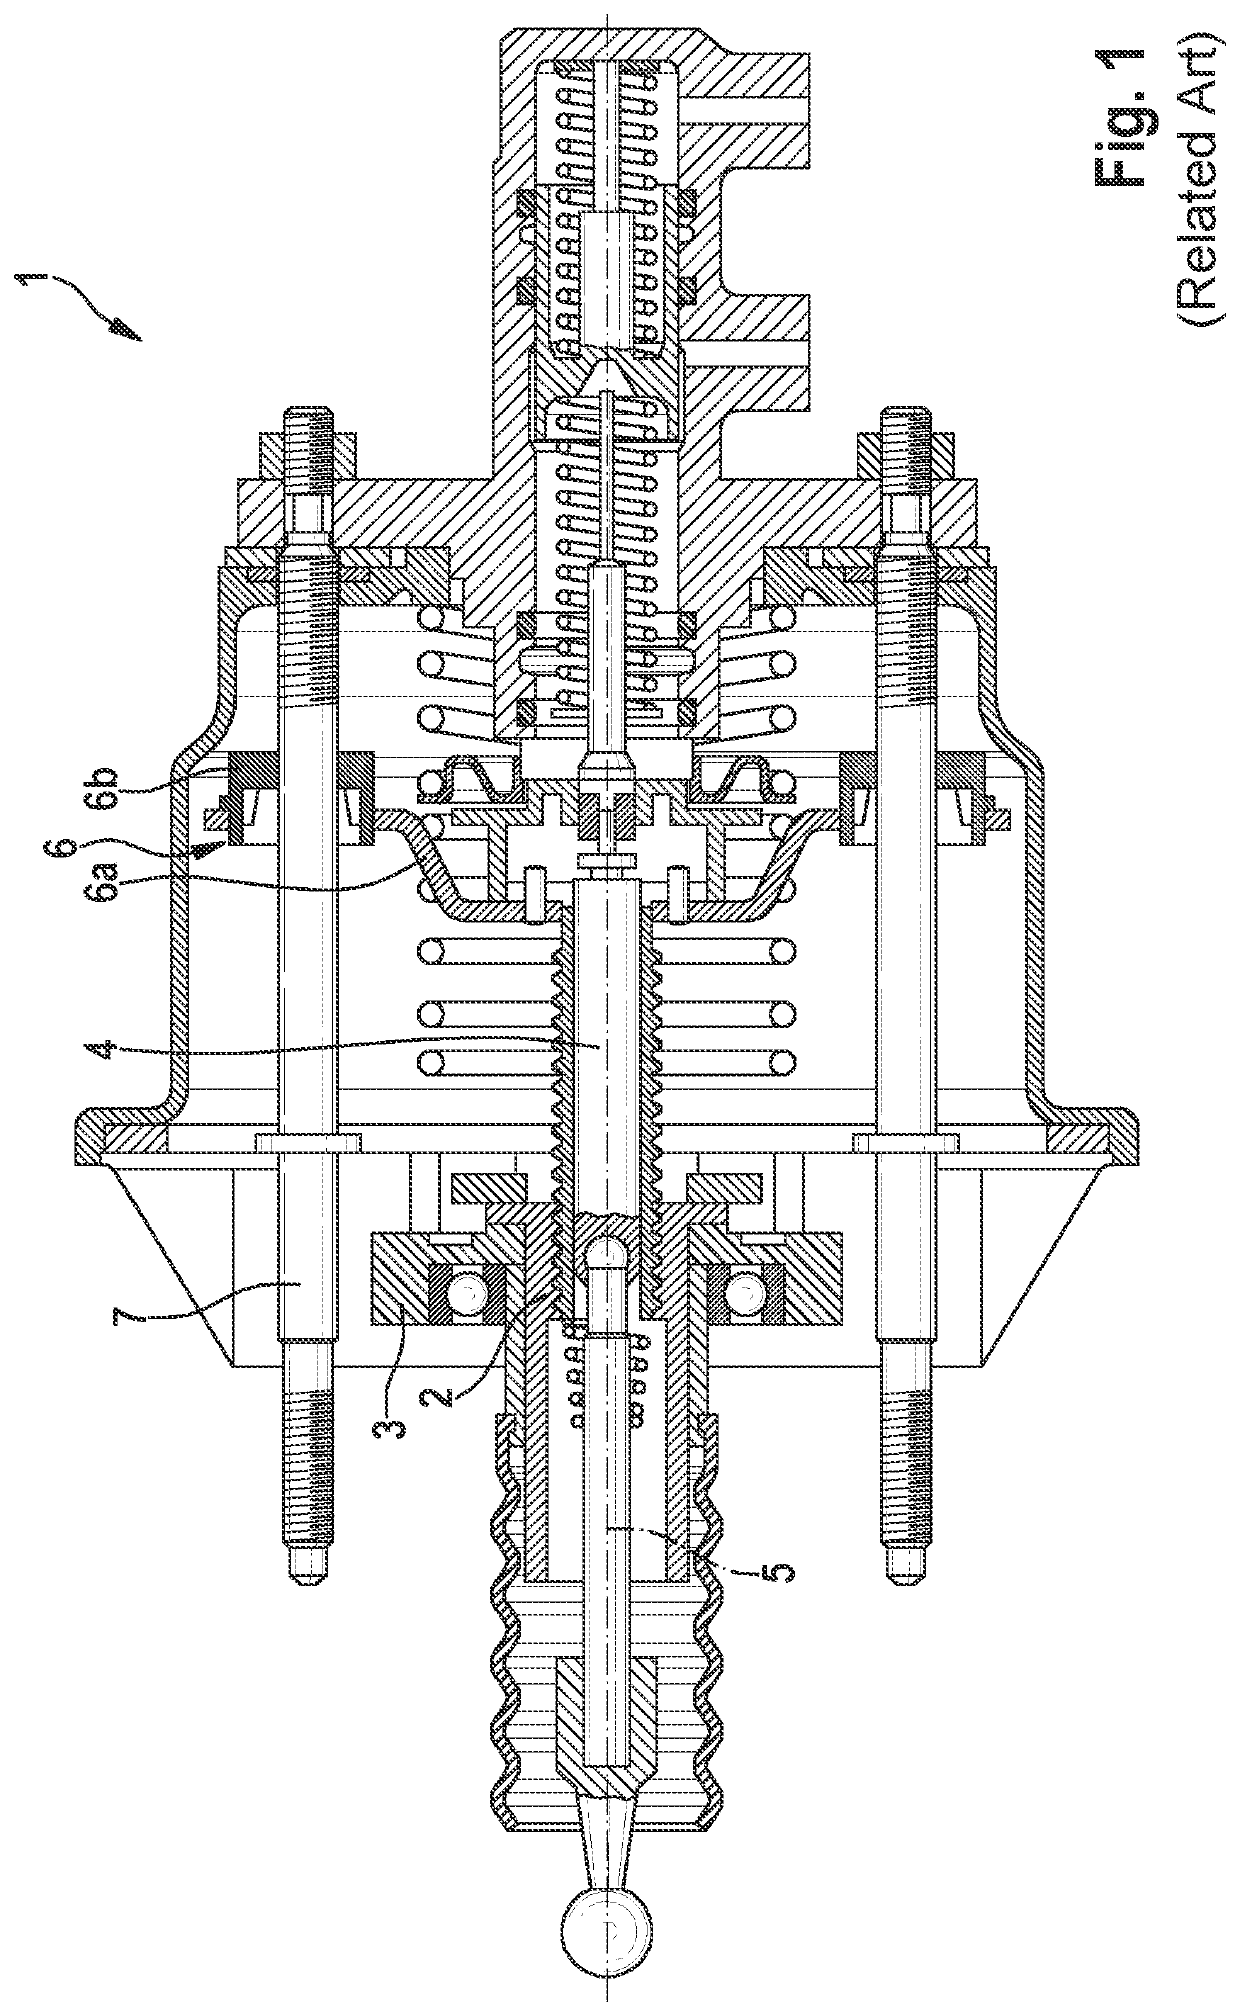 Electromechanical brake pressure generator including a gear and method for manufacturing a gear for an electromechanical brake pressure generator